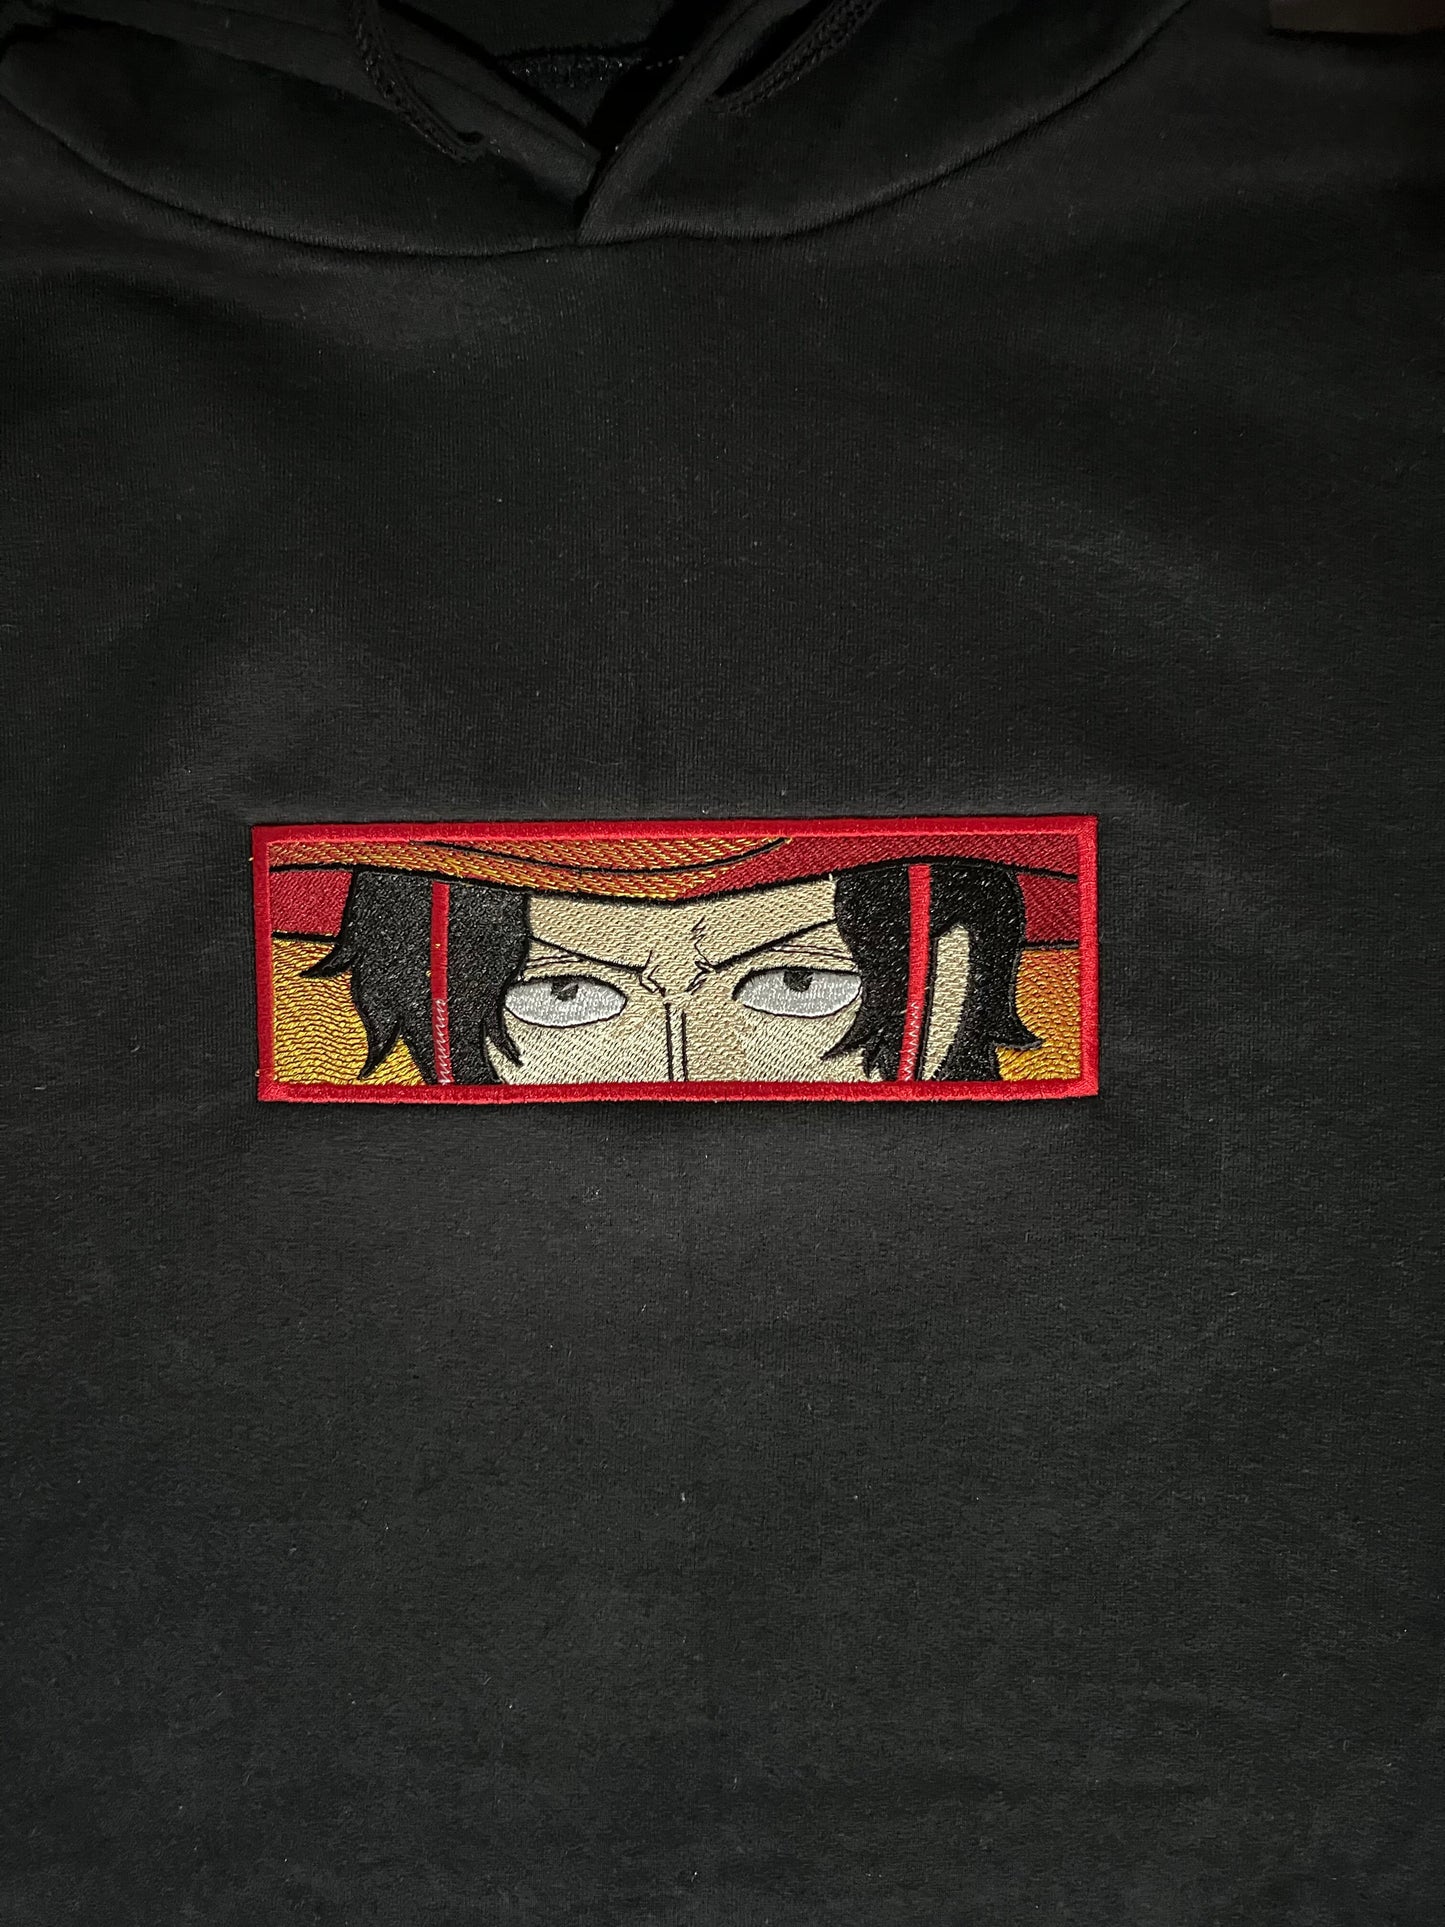 Ace Eyes Embroidery (One Piece)